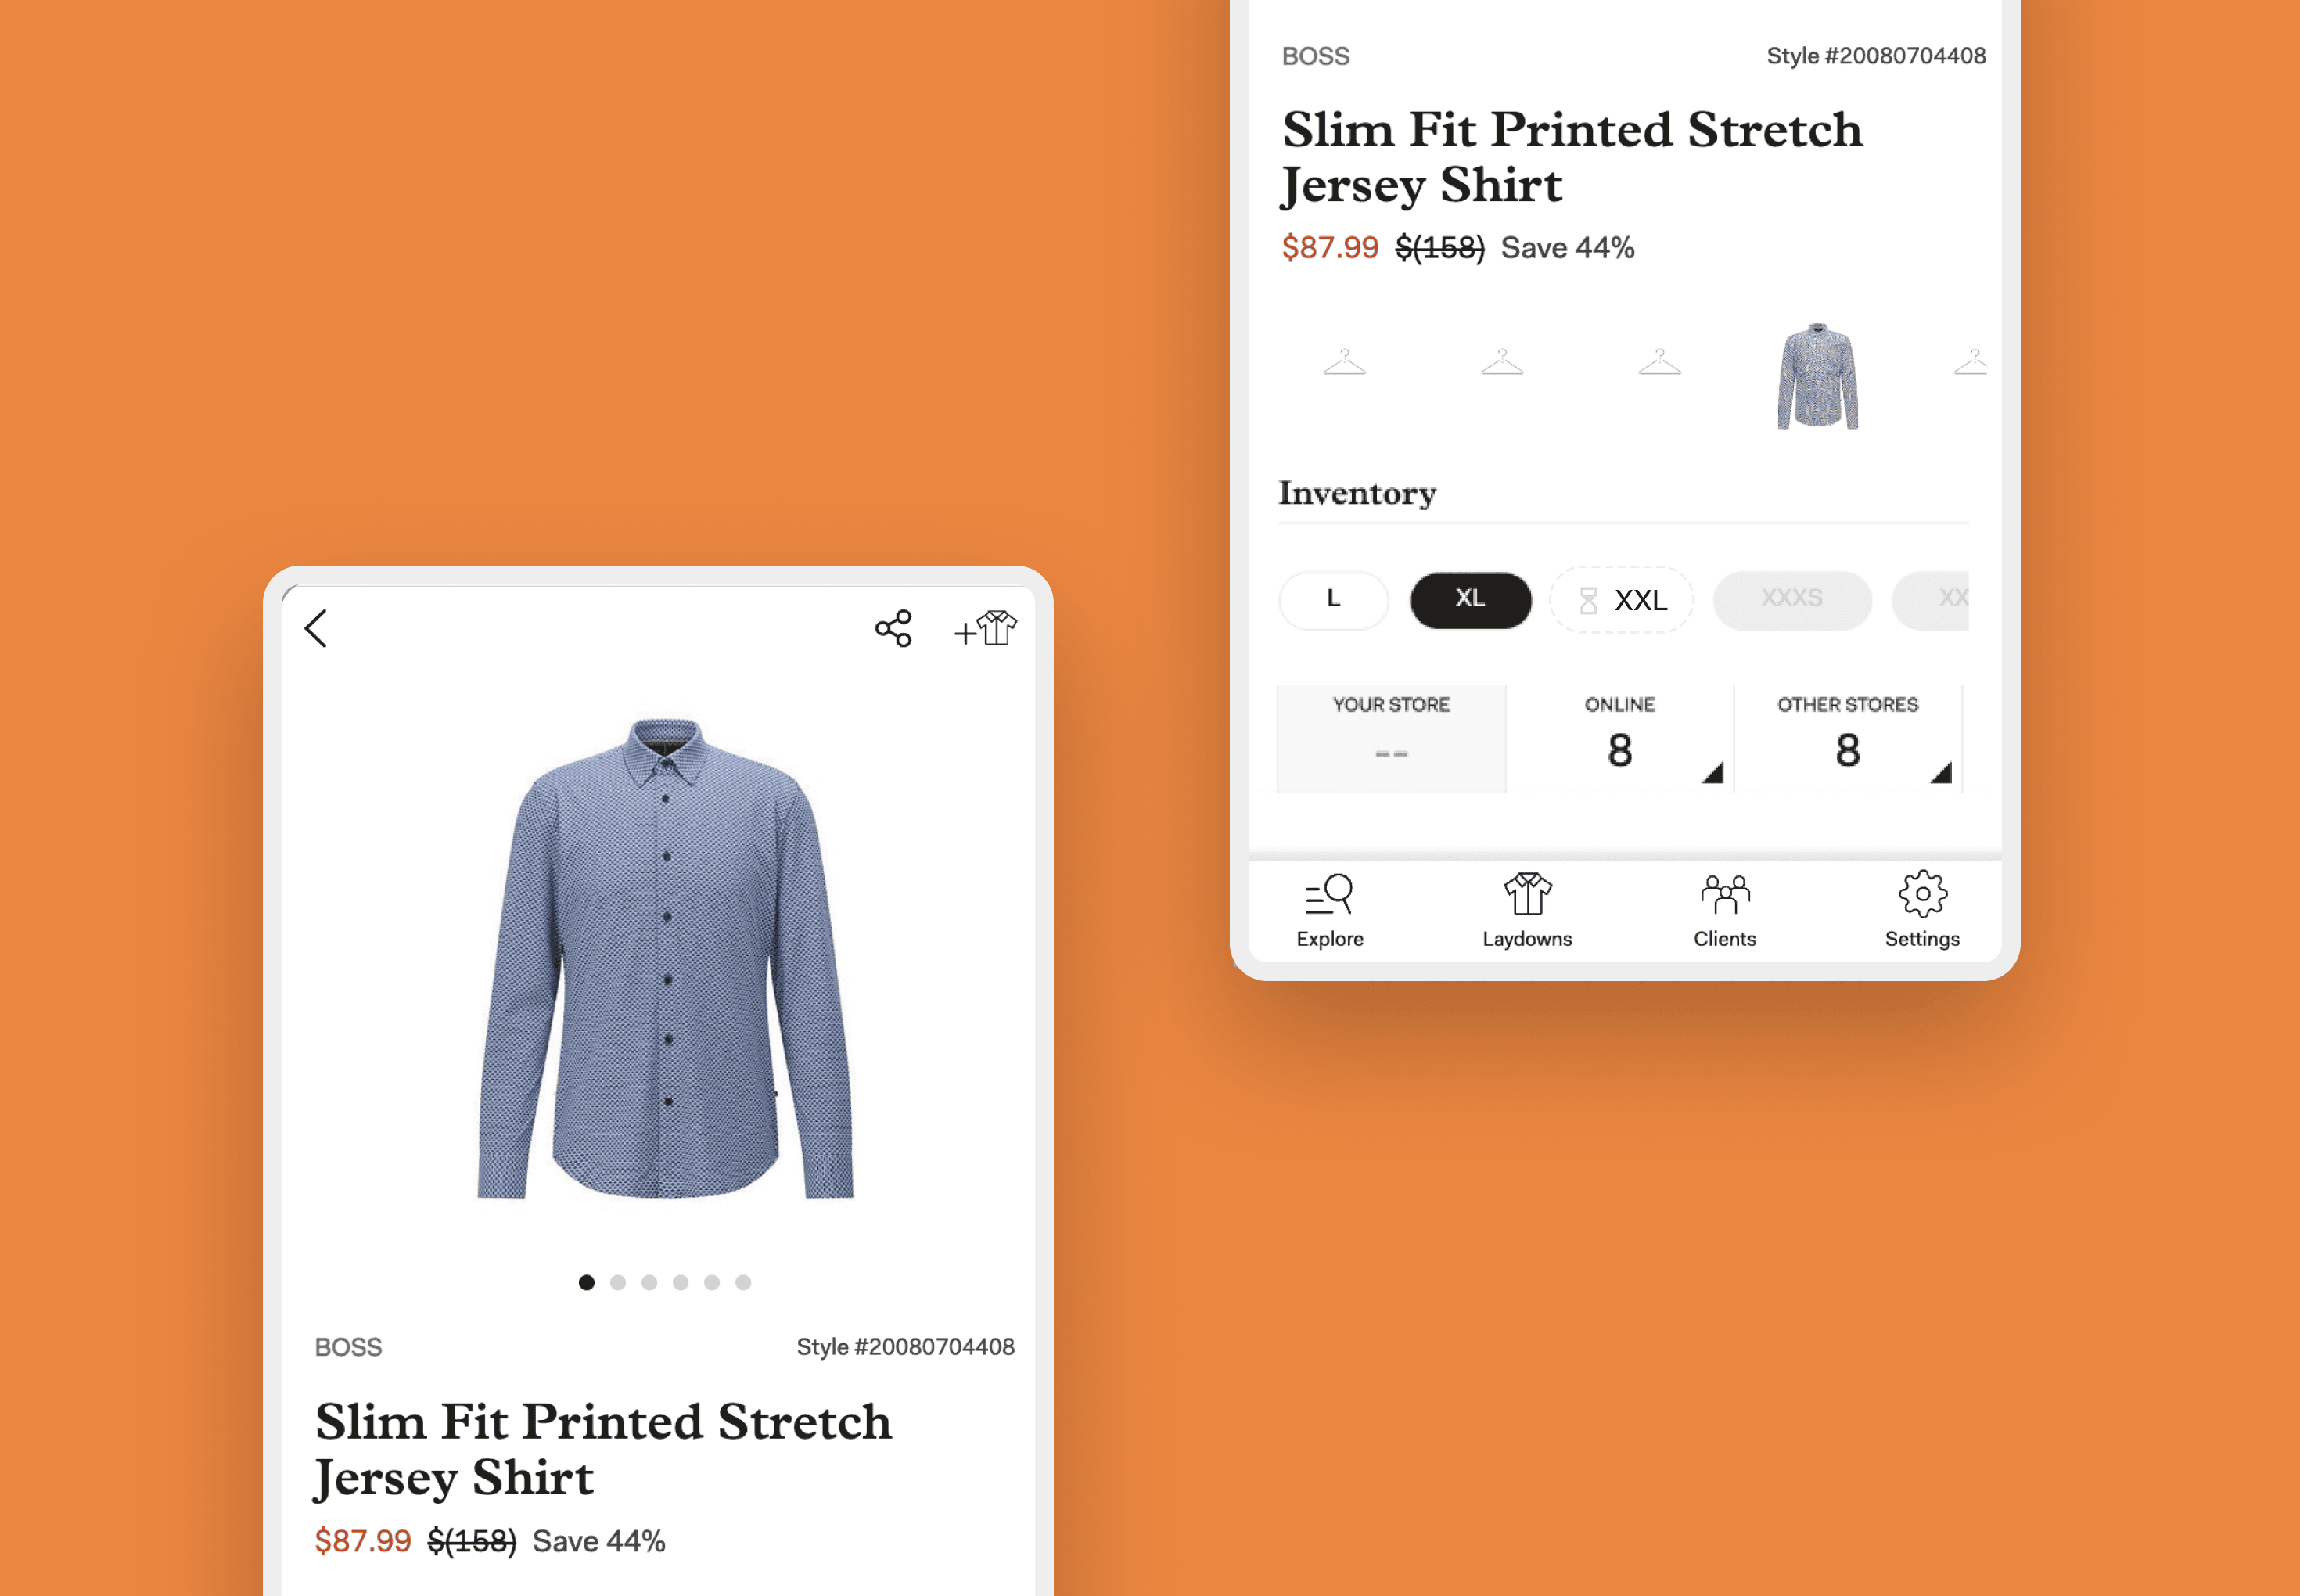 Screenshots of a product page powered by commercetools for a slim fit printed stretch jersey shirt.